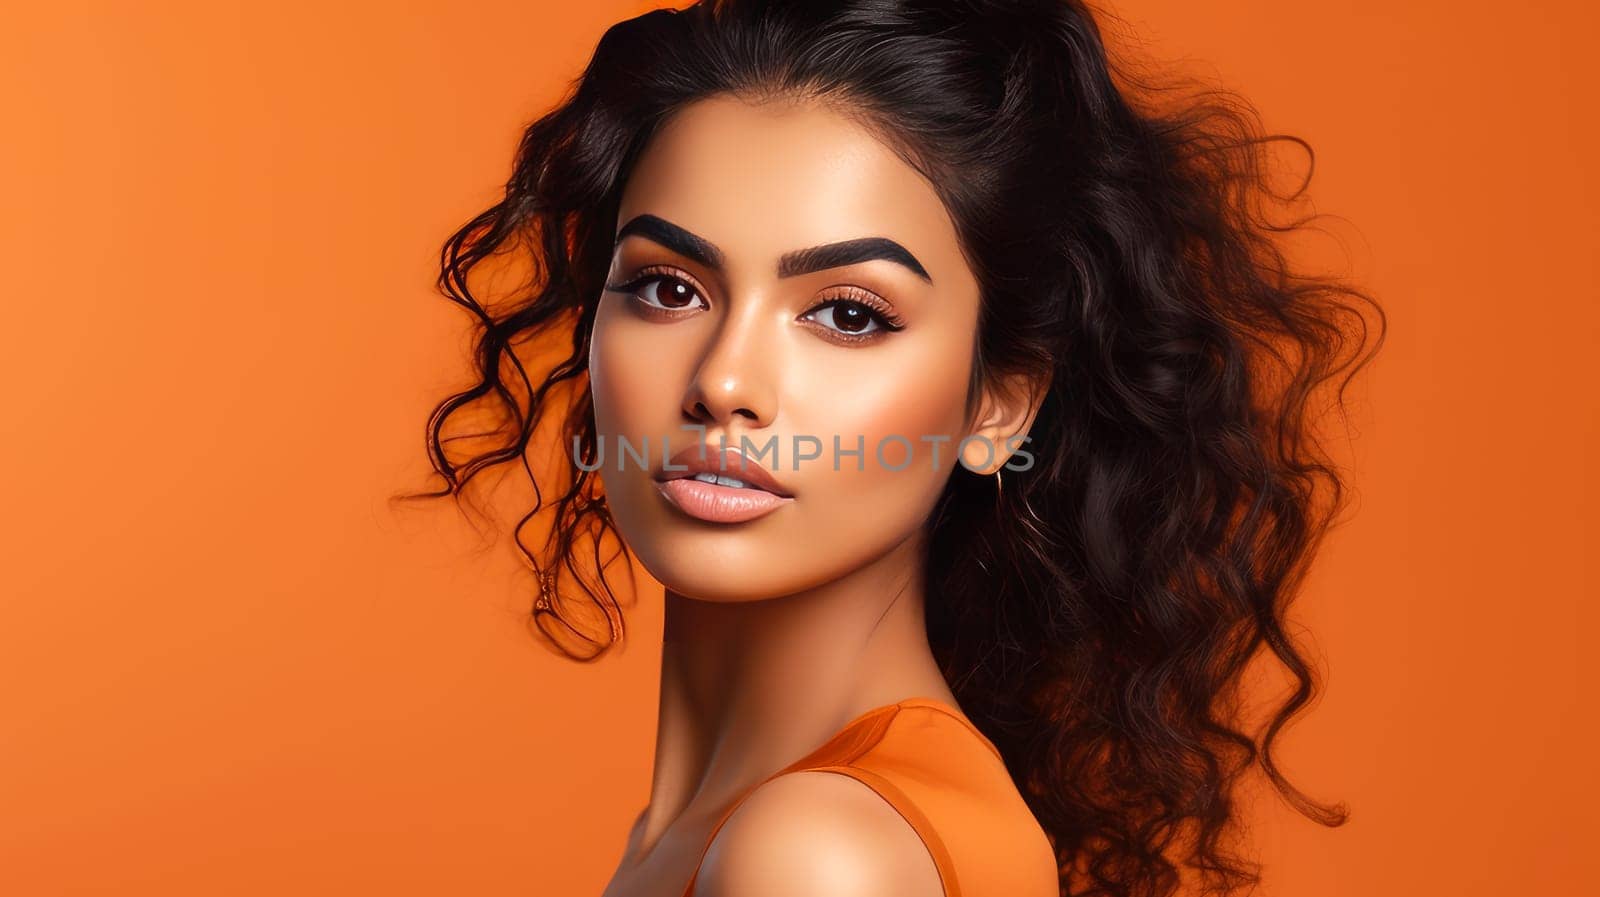 Beautiful, elegant, sexy Latino, Spain woman with perfect skin, on an orange background, banner. Advertising of cosmetic products, spa treatments, shampoos and hair care products, dentistry and medicine, perfumes and cosmetology for women